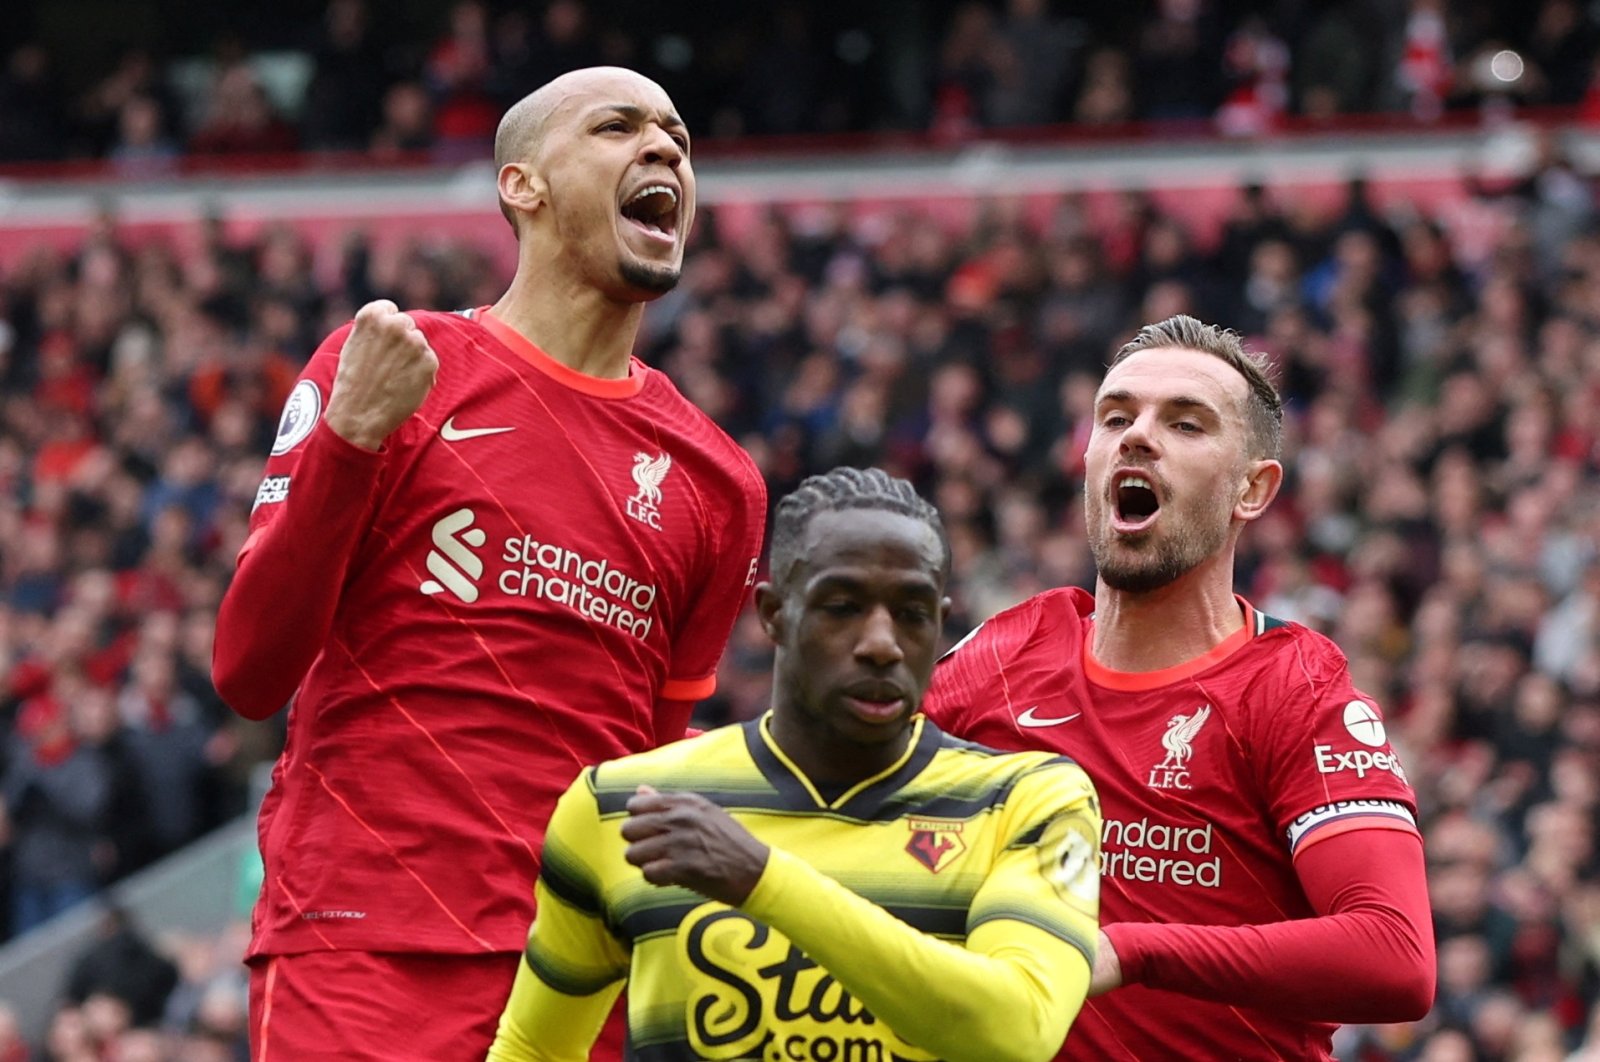 Liverpool&#039;s Fabinho celebrates scoring his team&#039;s second goal with Jordan Henderson during a Premier League match against Watford, at Anfield Stadium, in Liverpool, U.K., April 2, 2022. (Reuters Photo)